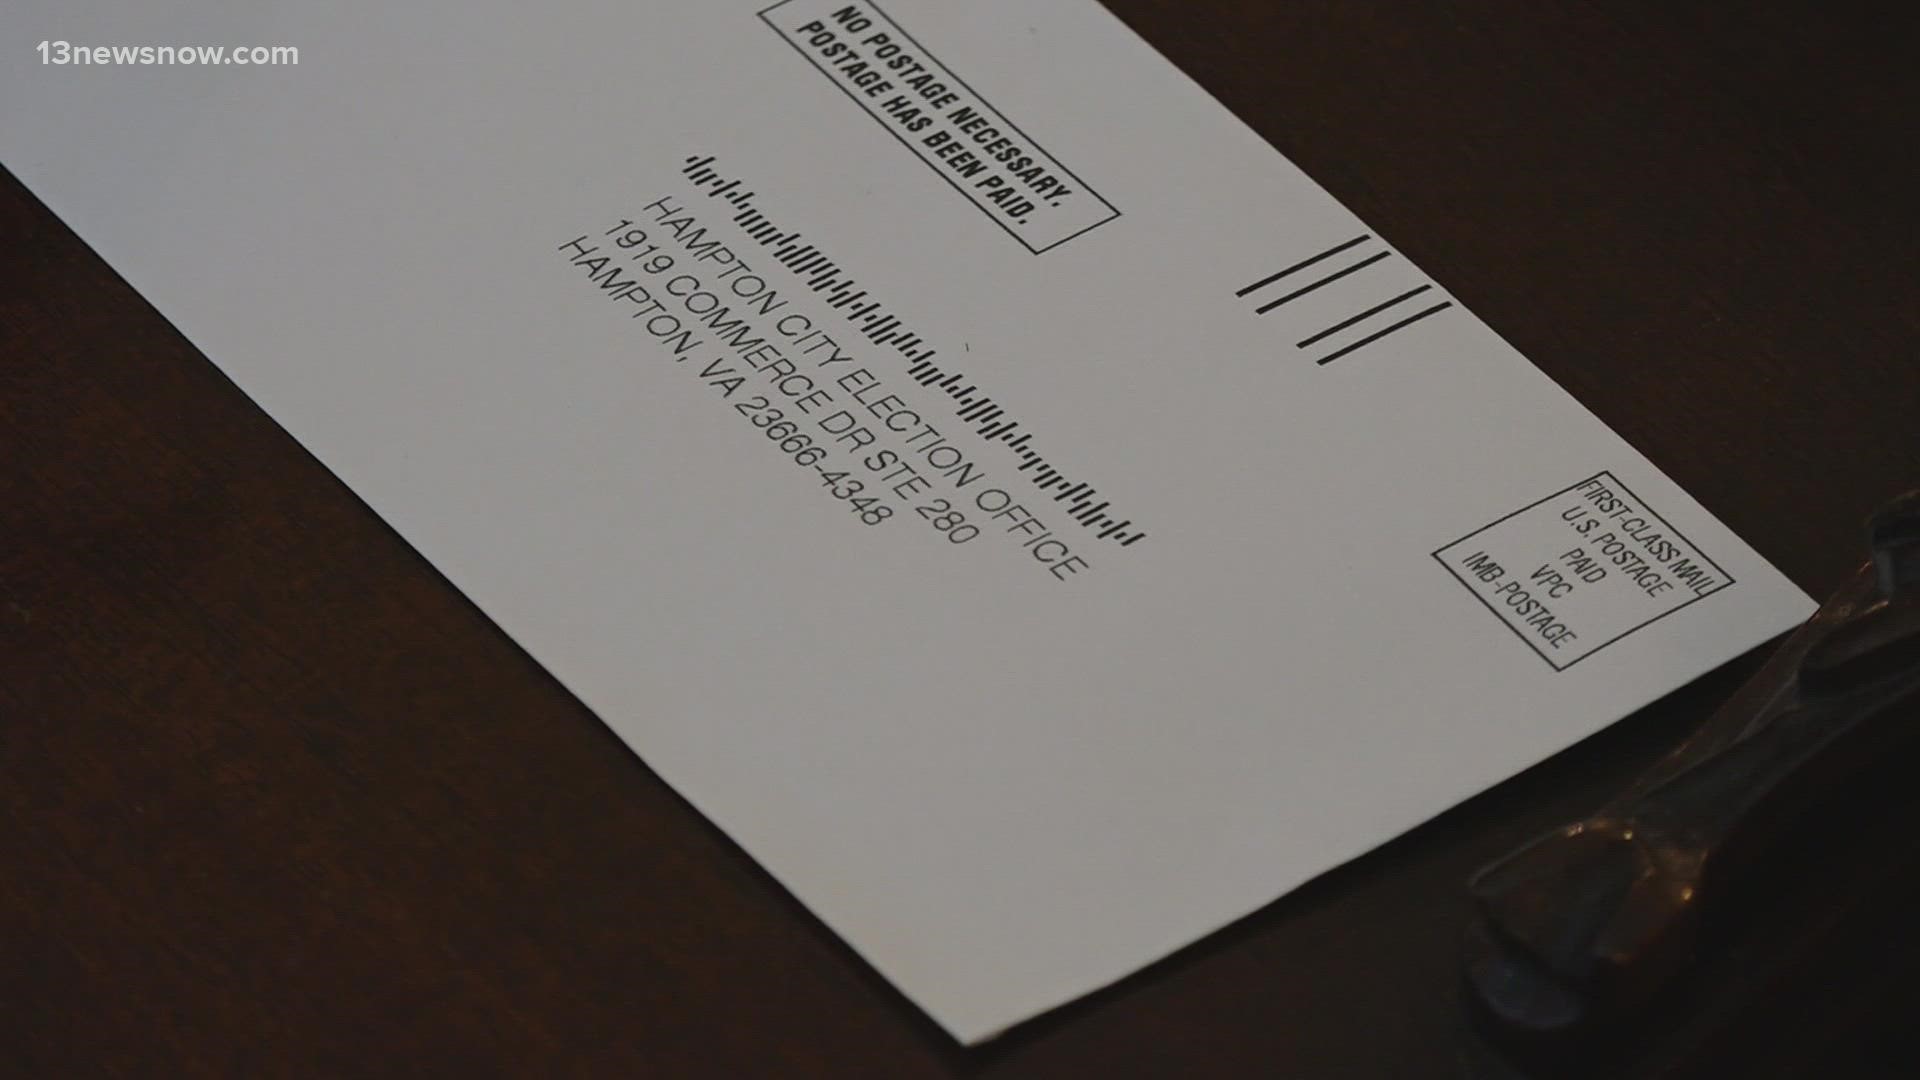 A non-profit group says it sent thousands of absentee ballot forms to Hampton voters before the Registrar's Office changed locations, but voters don't need to worry.